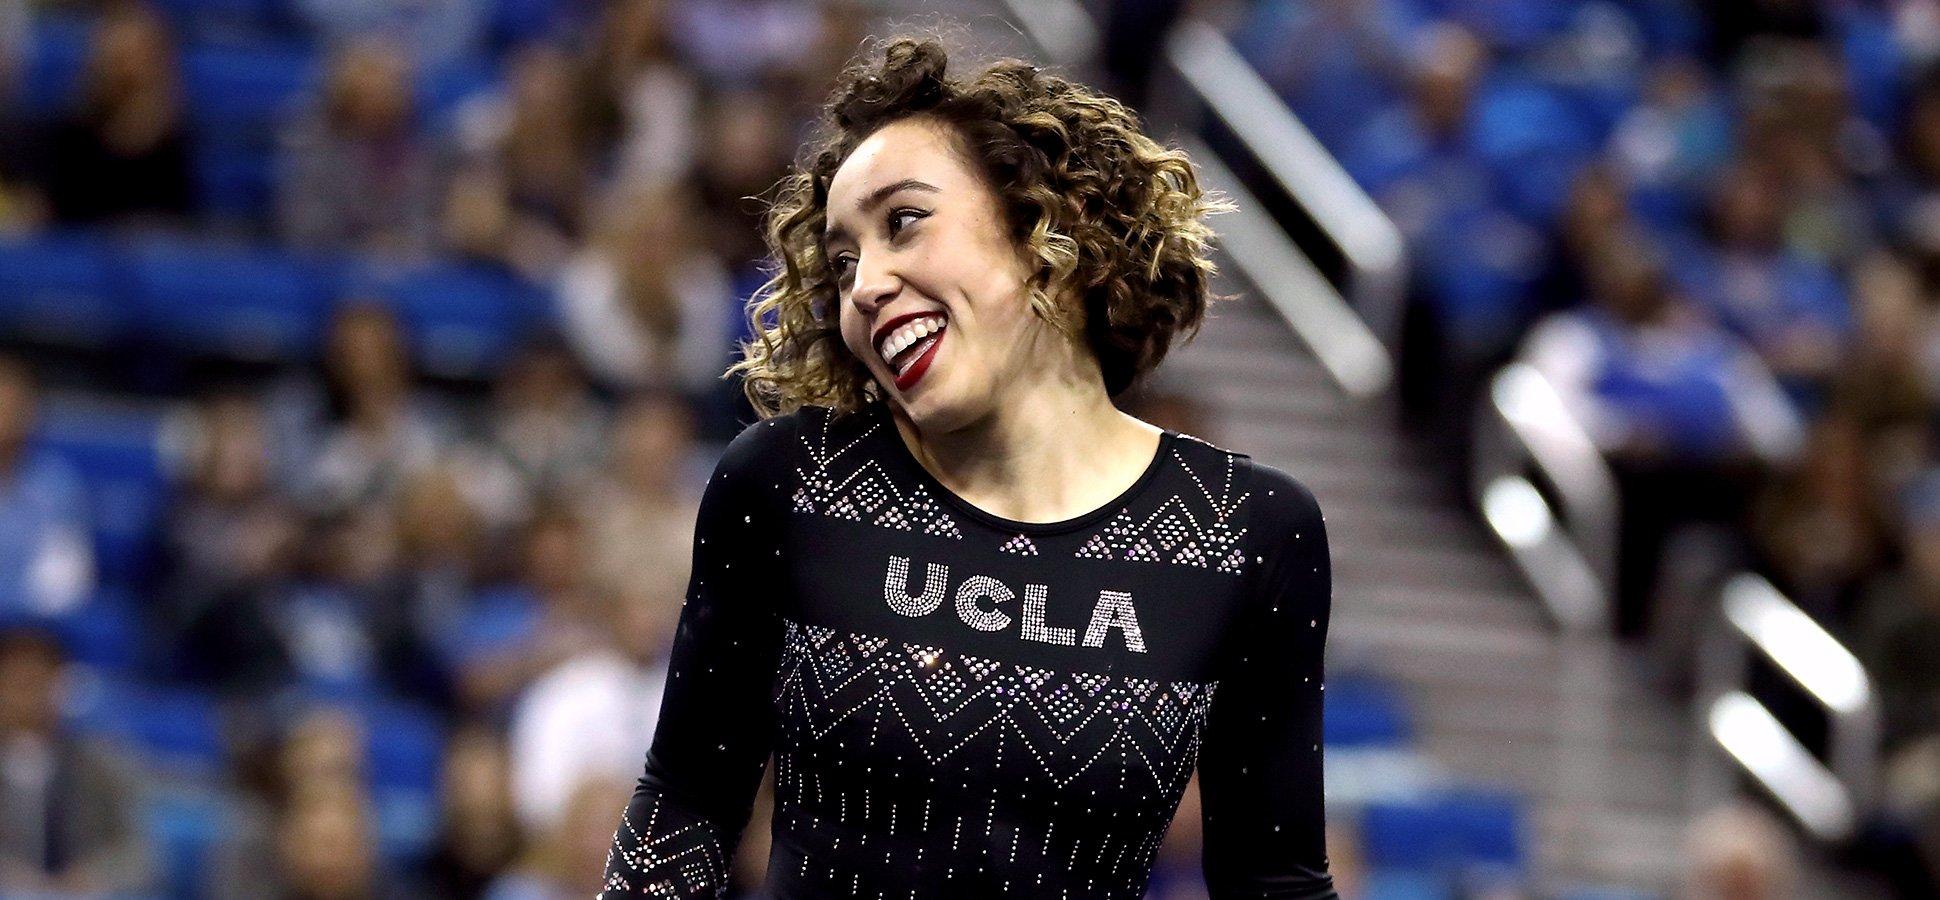 Want to Know What Real Success Looks Like? Watch Katelyn Ohashi's 88